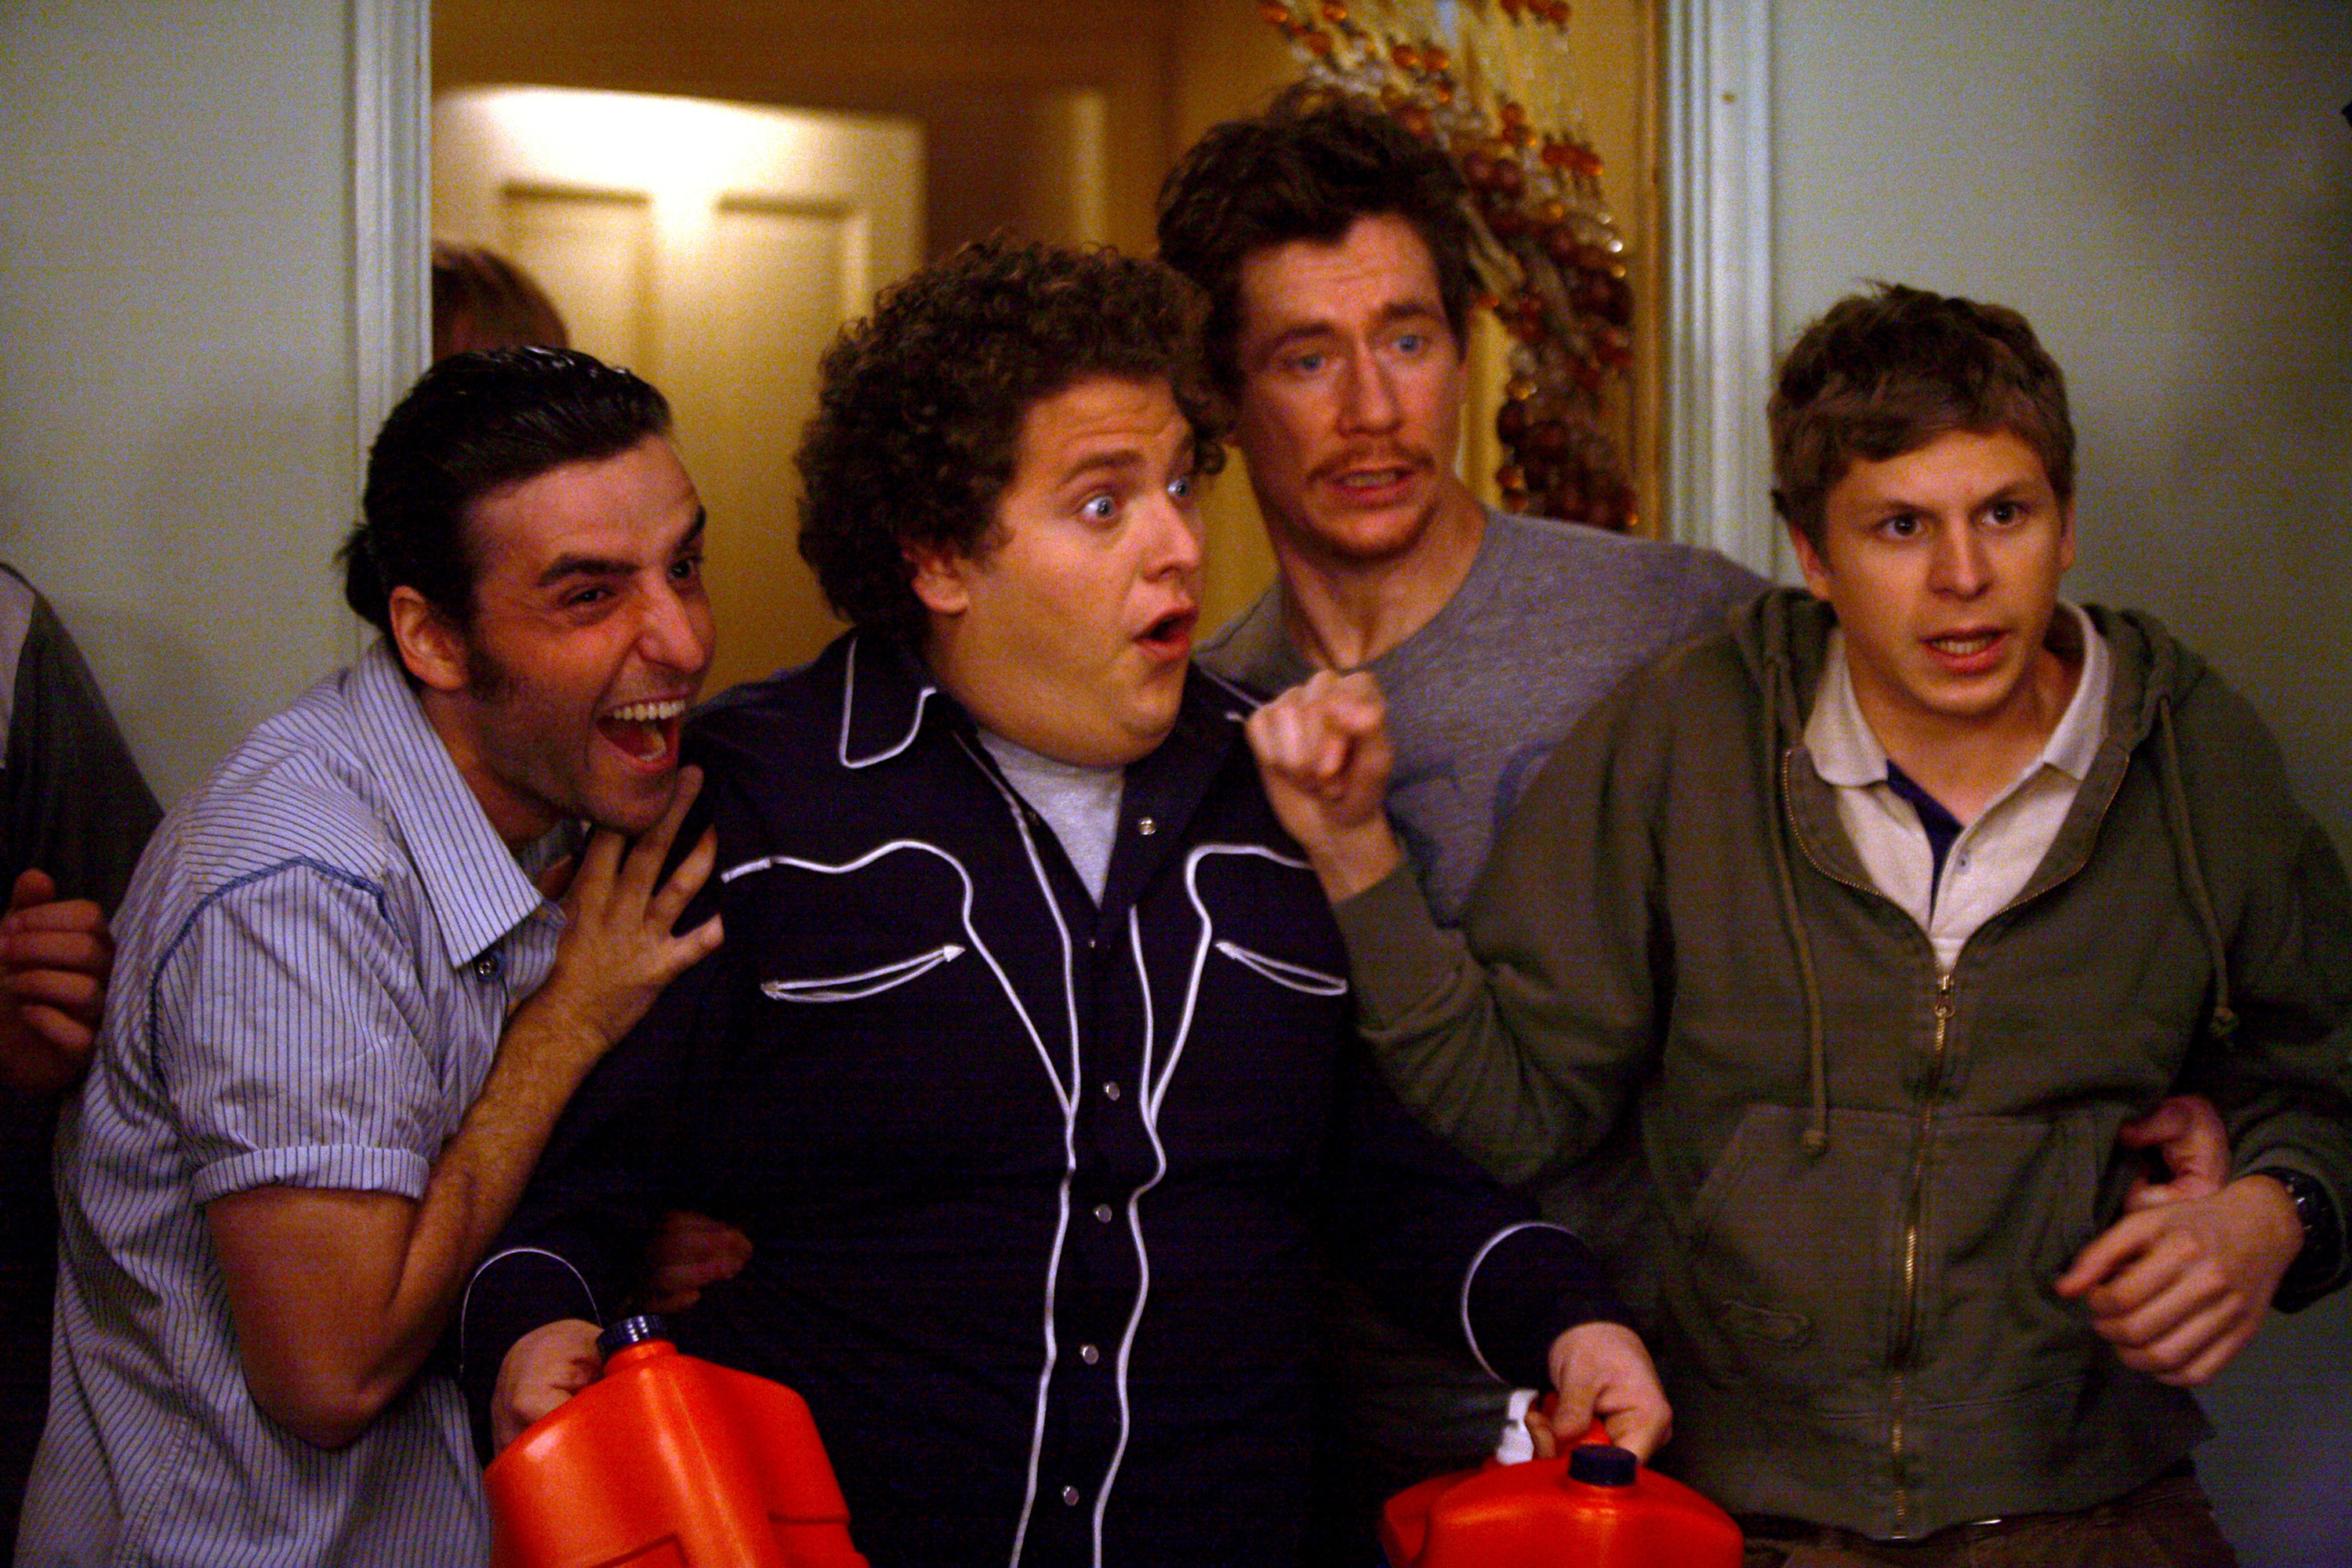 Jonah Hill and Michael Cera are shocked by something that happens at a party